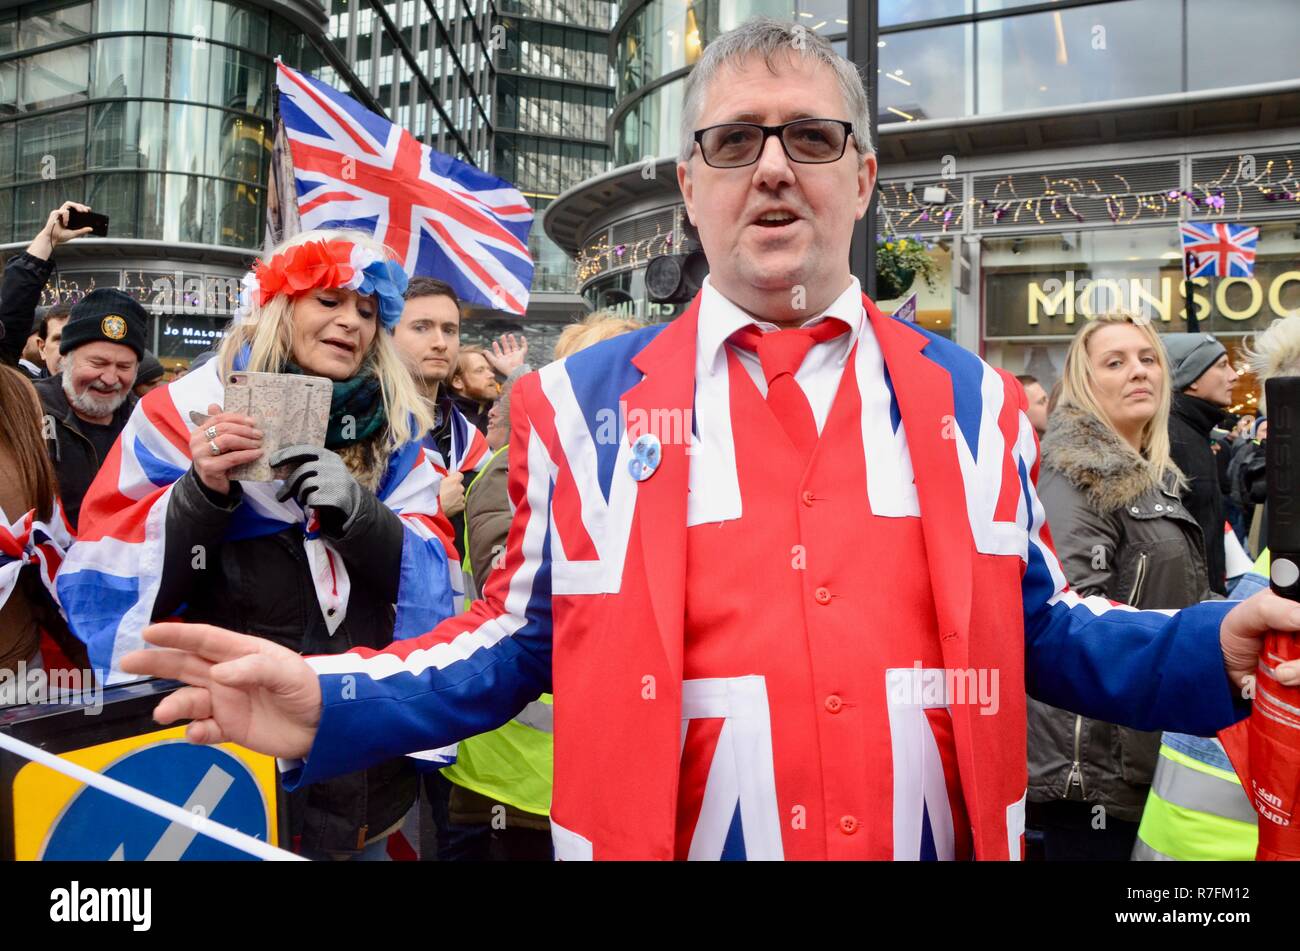 Brexit betrayal UKIP march with tommy robinson in central london 9th december 2018 union flag suited man Stock Photo